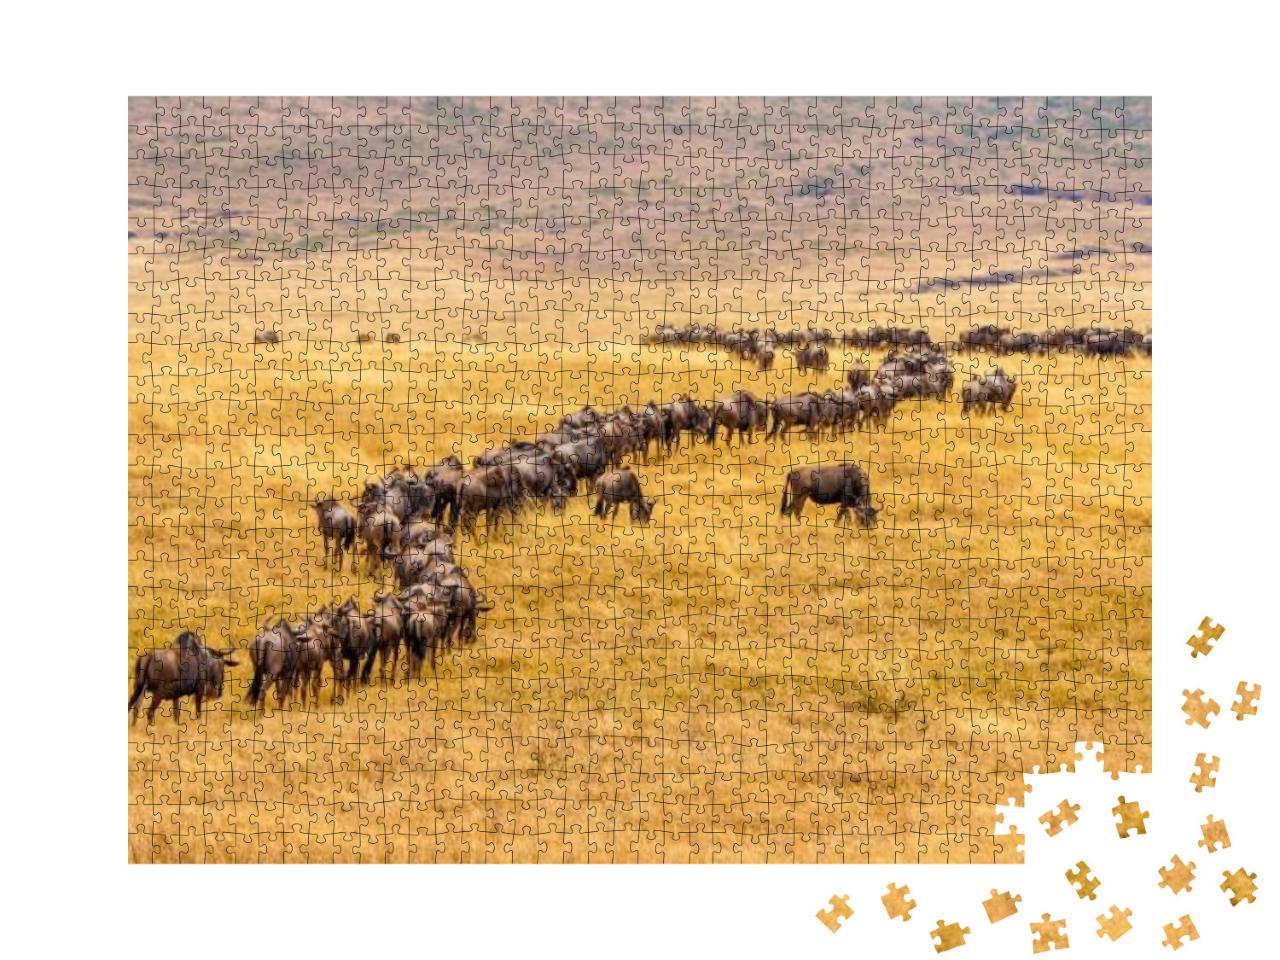 Wildebeest on Savannah in Africa... Jigsaw Puzzle with 1000 pieces